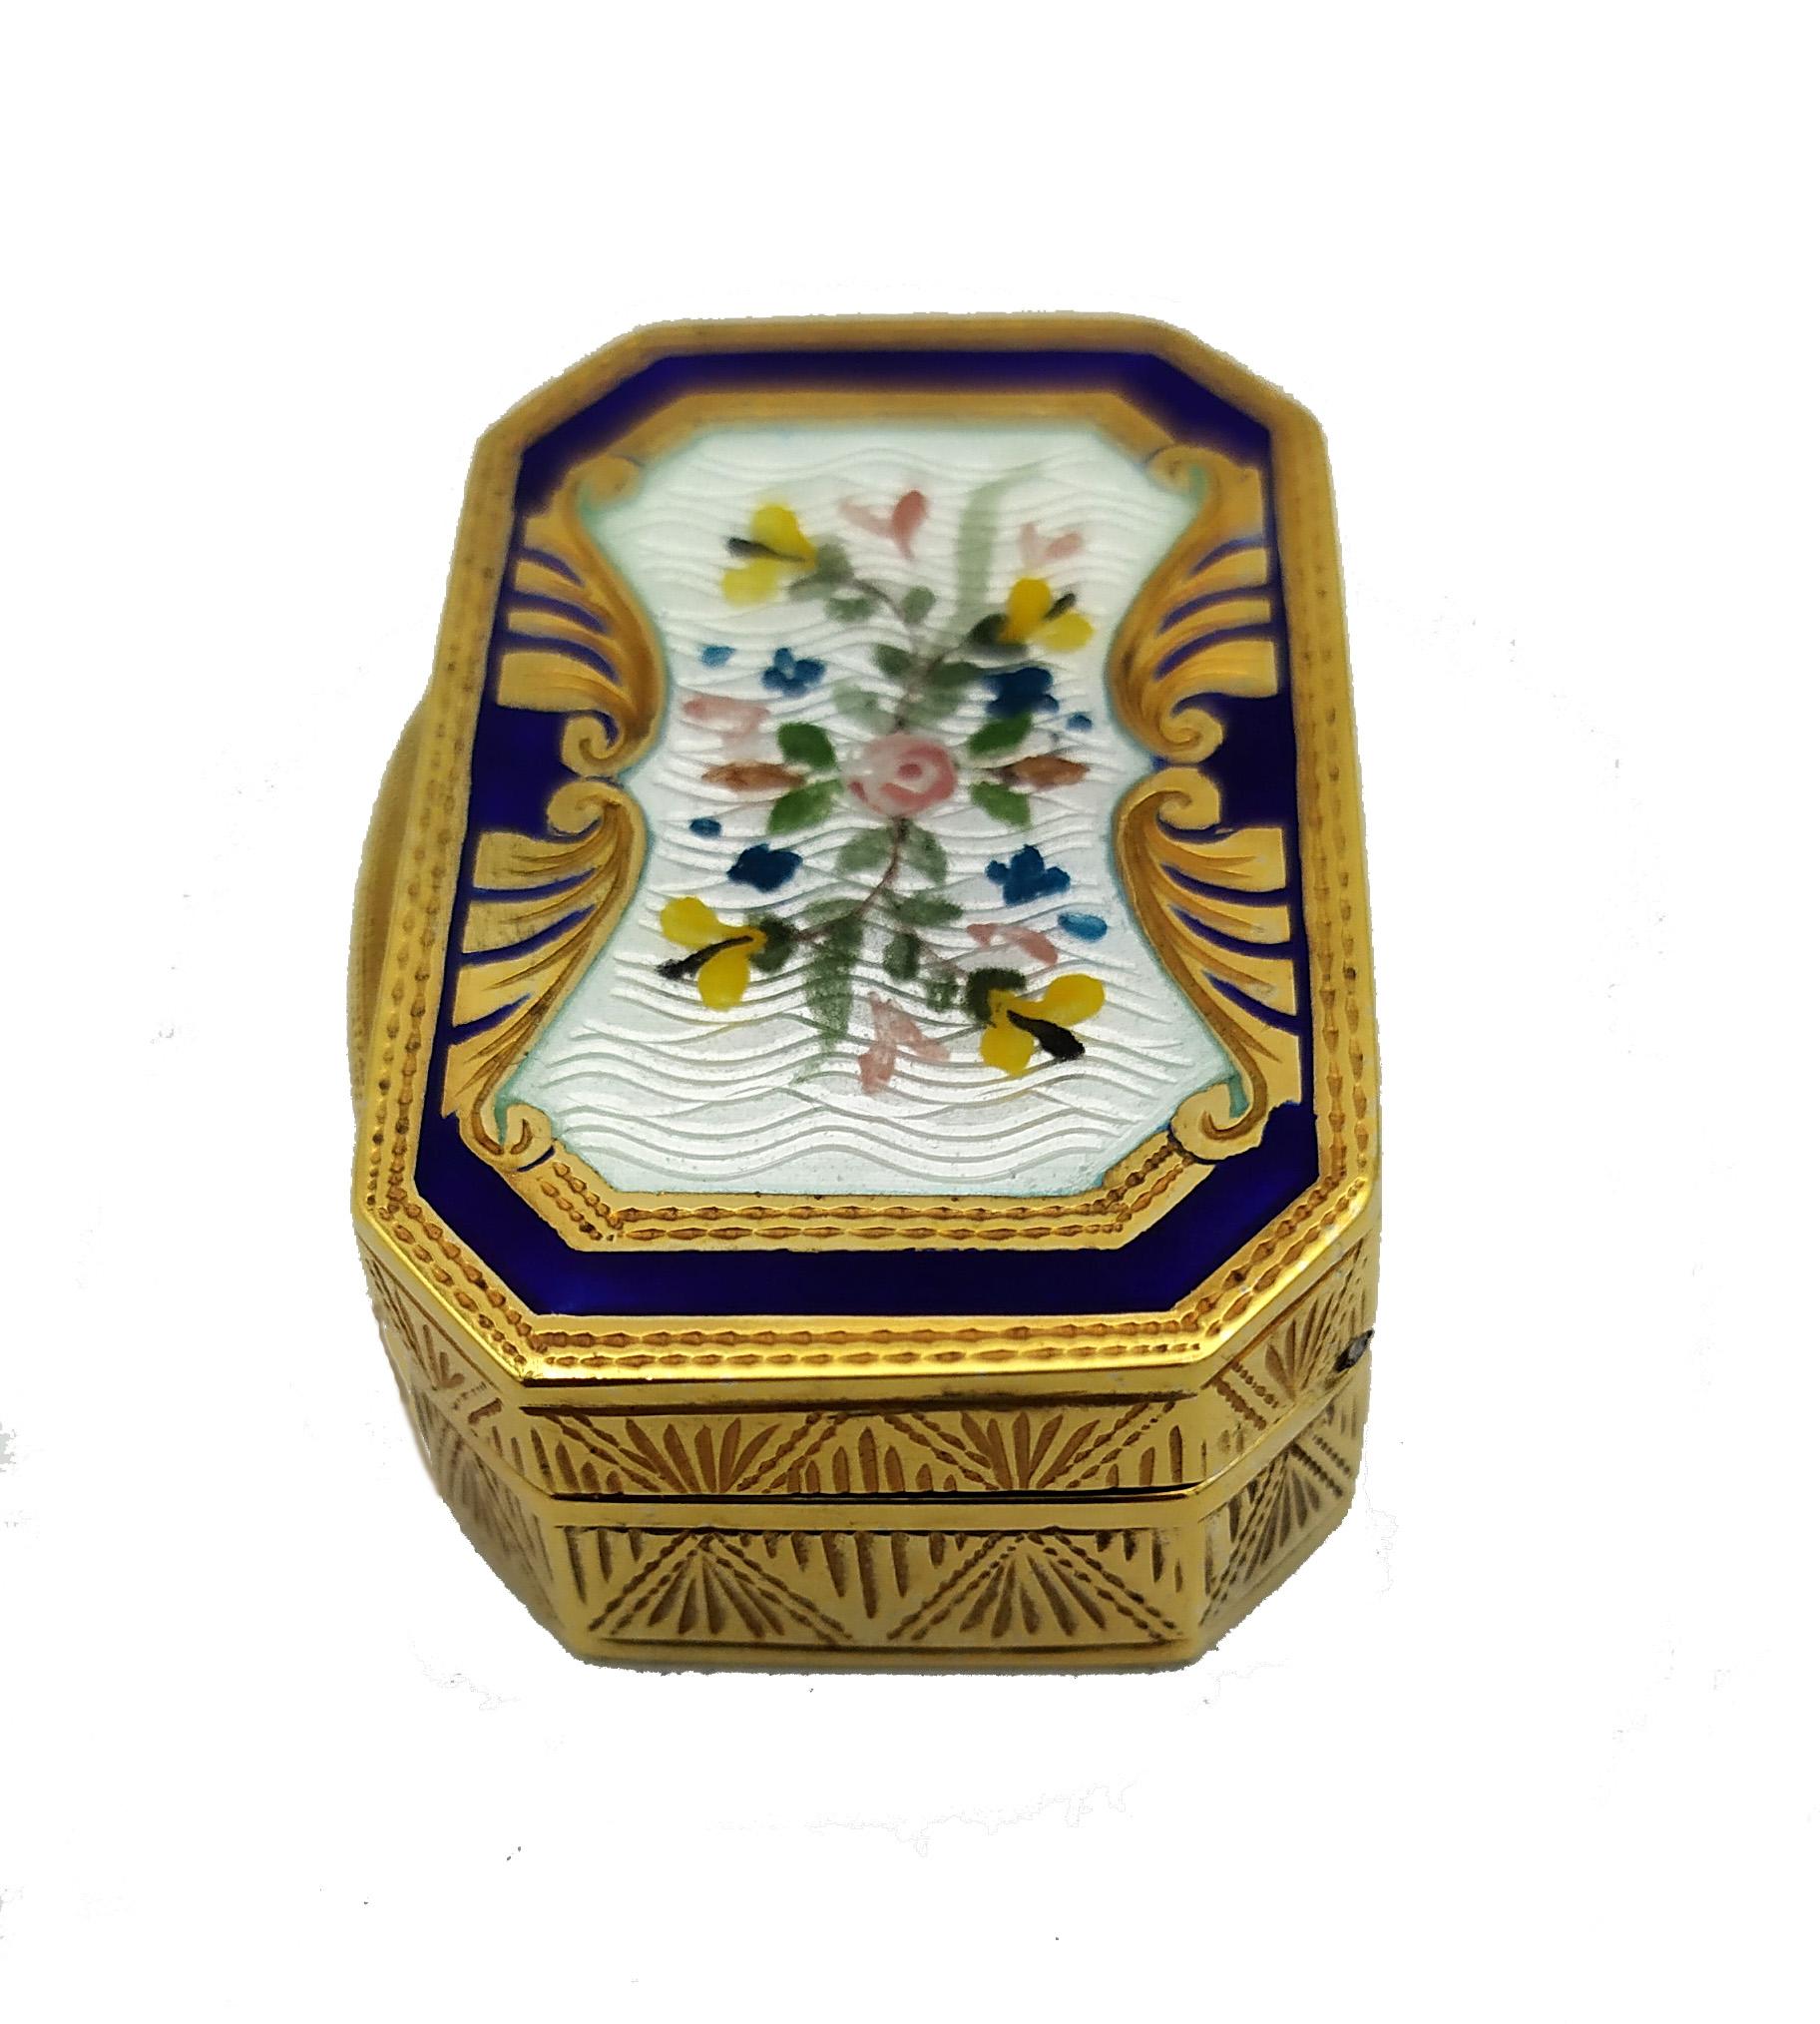 Pill Box Floral miniature and  fine hand-engravings Art Nouveau style Salimbeni.Shaped pillbox in 925/1000 sterling silver gold plated with translucent fired enamels on guillochè and hand-painted floral miniature, with fine hand-engravings. Viennese